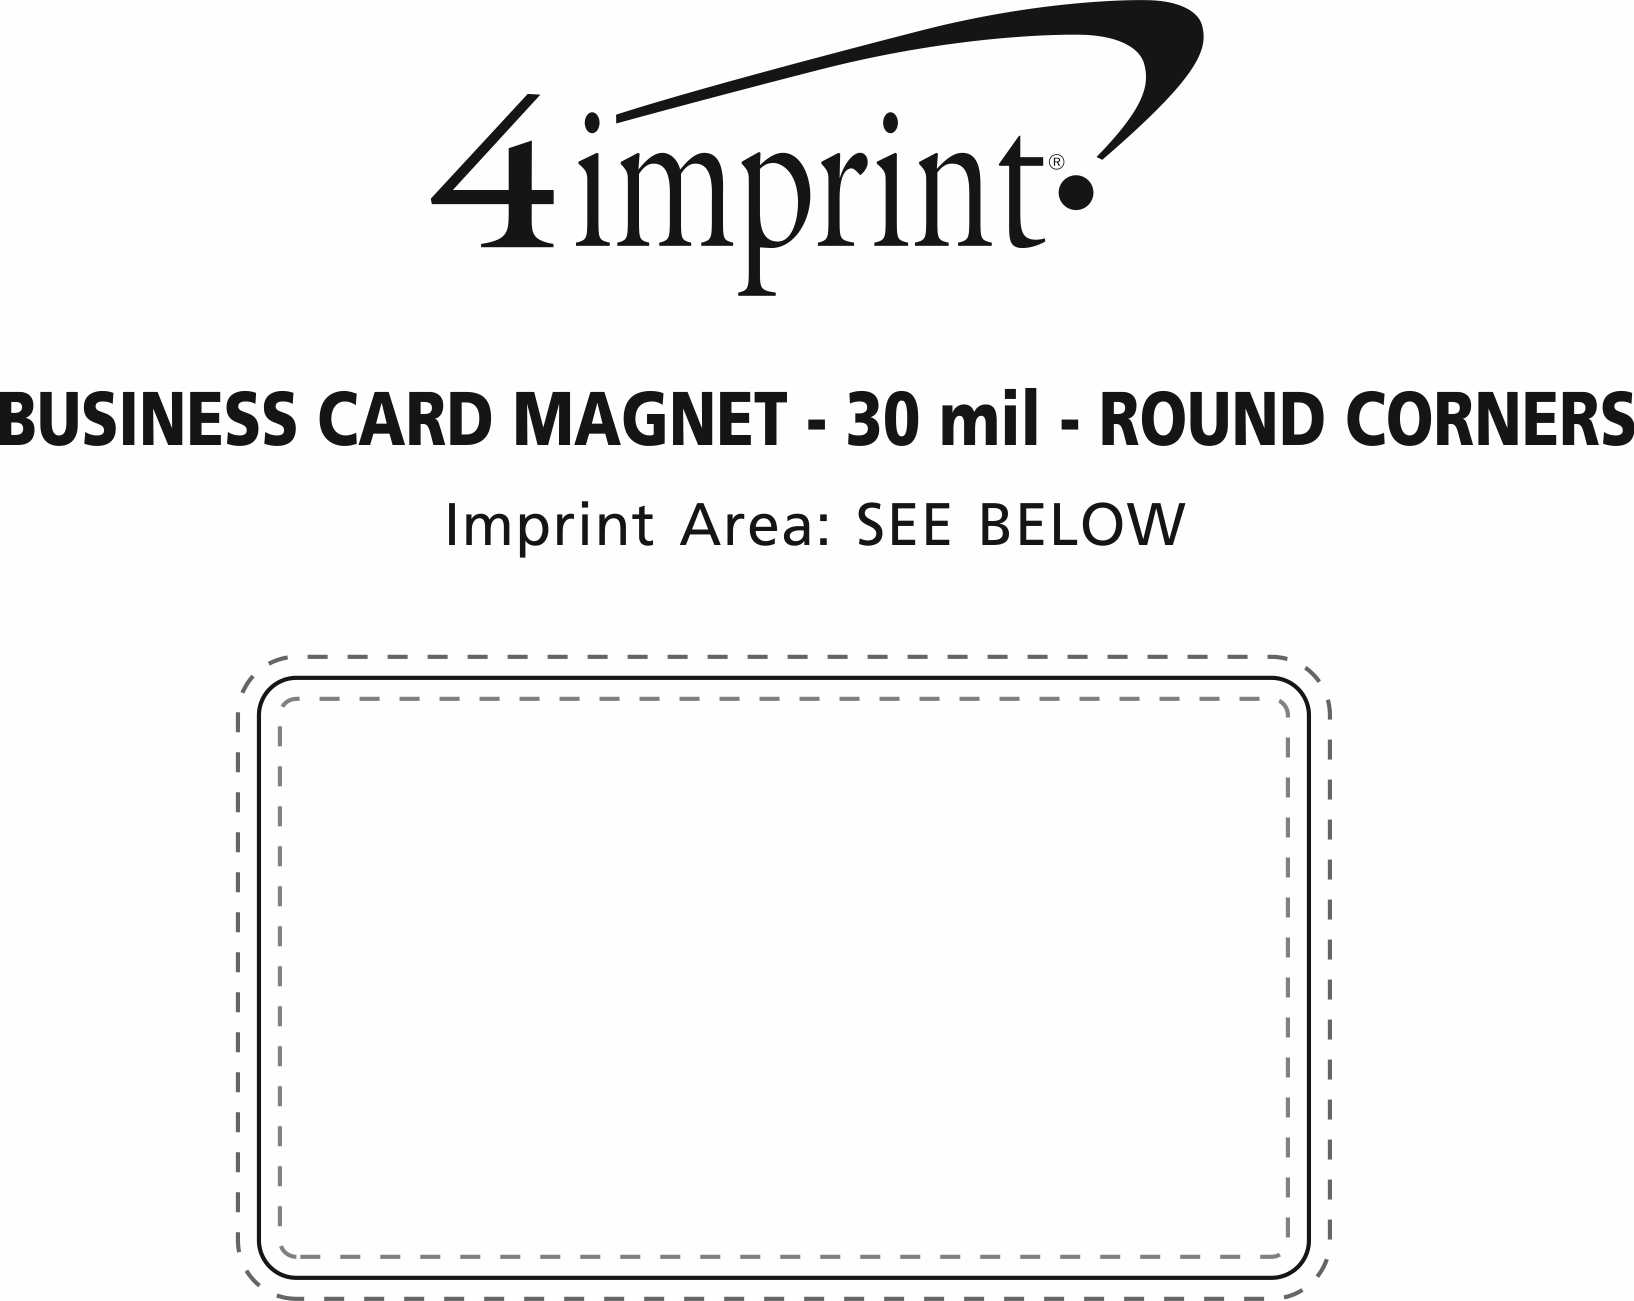 Imprint Area of Business Card Magnet - 30 mil - Round Corners